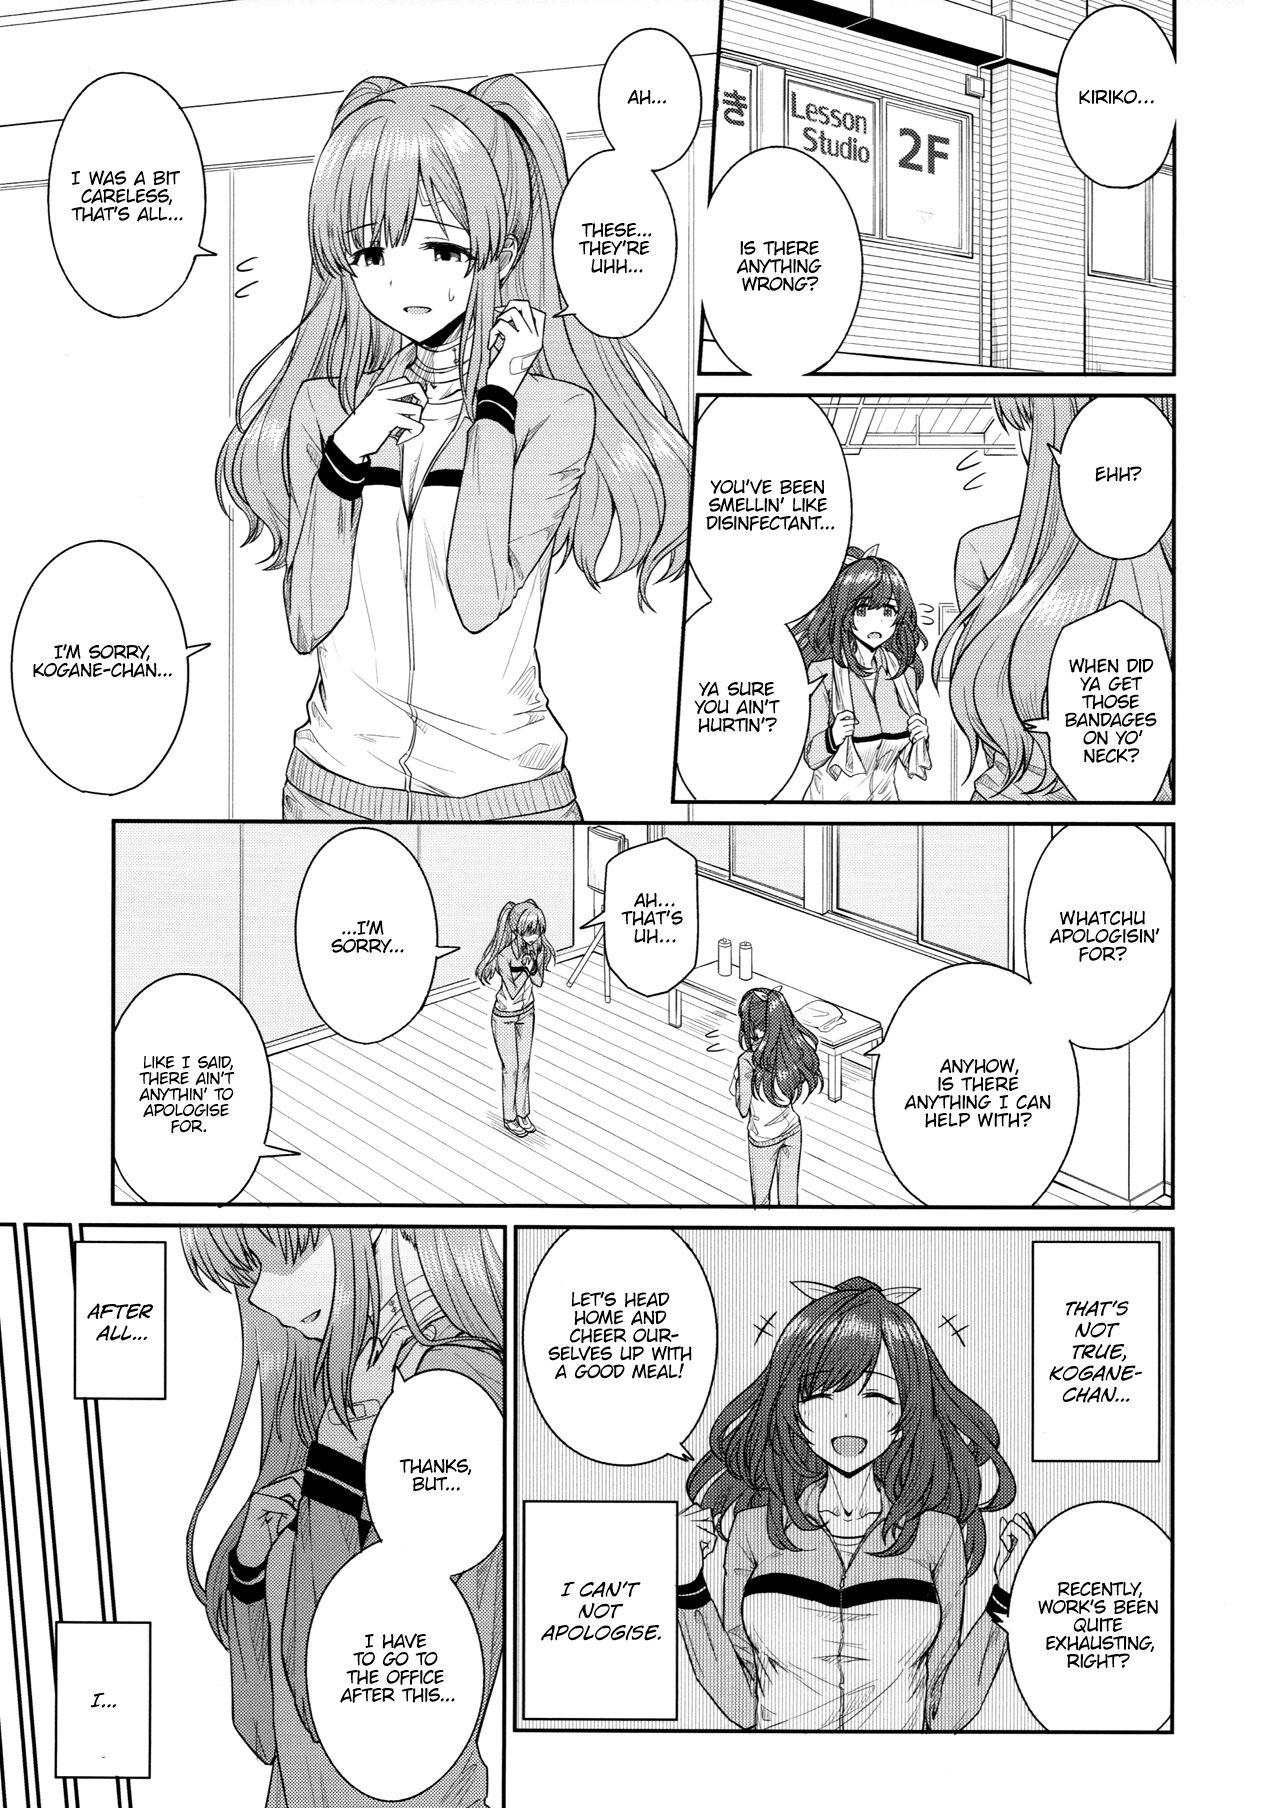 Moan Mou Hakui wa Niawanai | The White Gown Doesn't Suit Me Anymore - The idolmaster Stepsister - Page 2